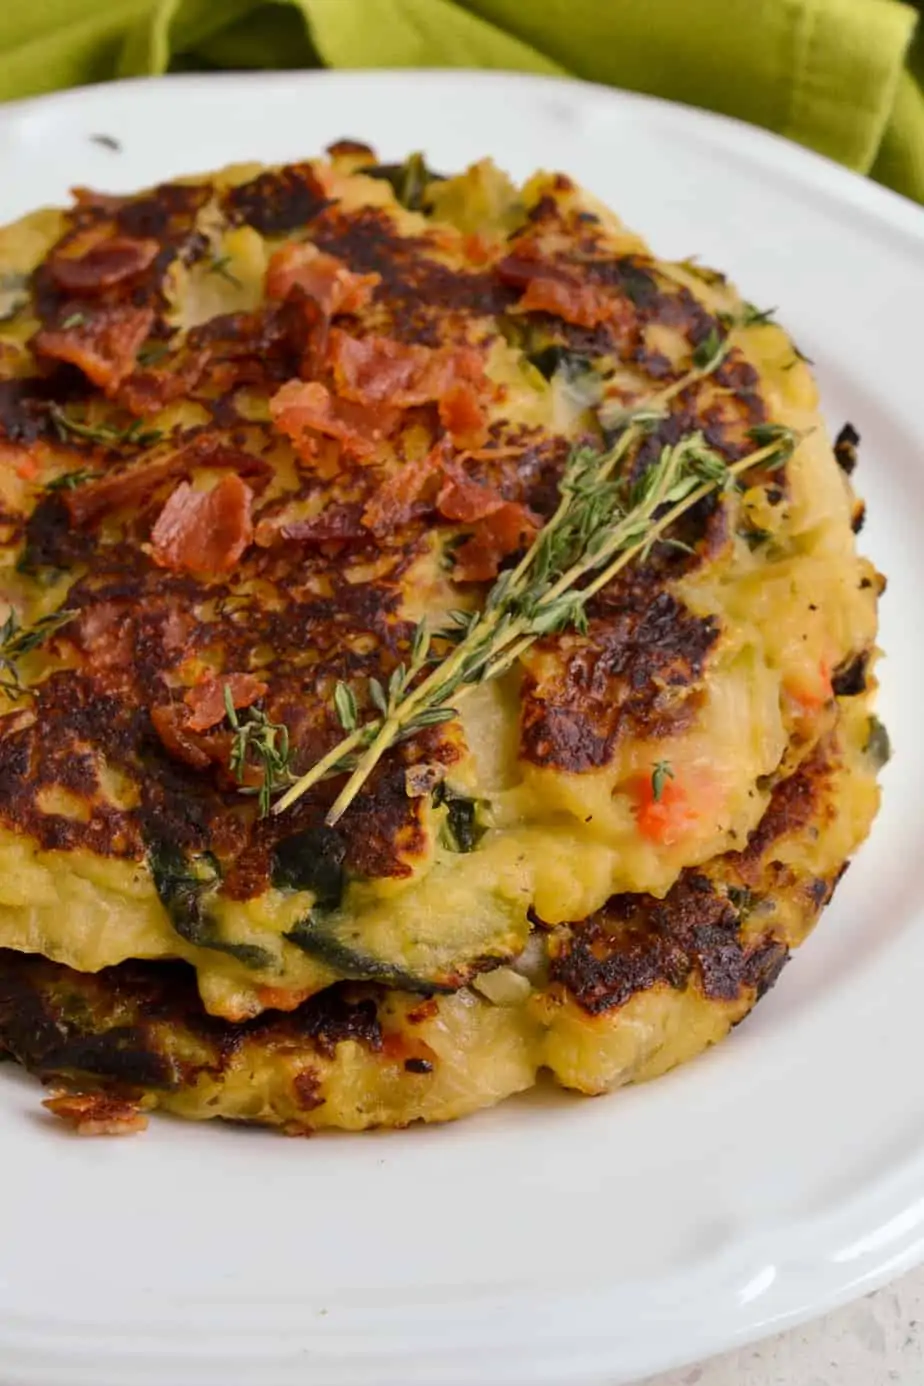 Mashed potato cakes made with leftover cooked veggies like carrots, cabbage, onions and kale. 